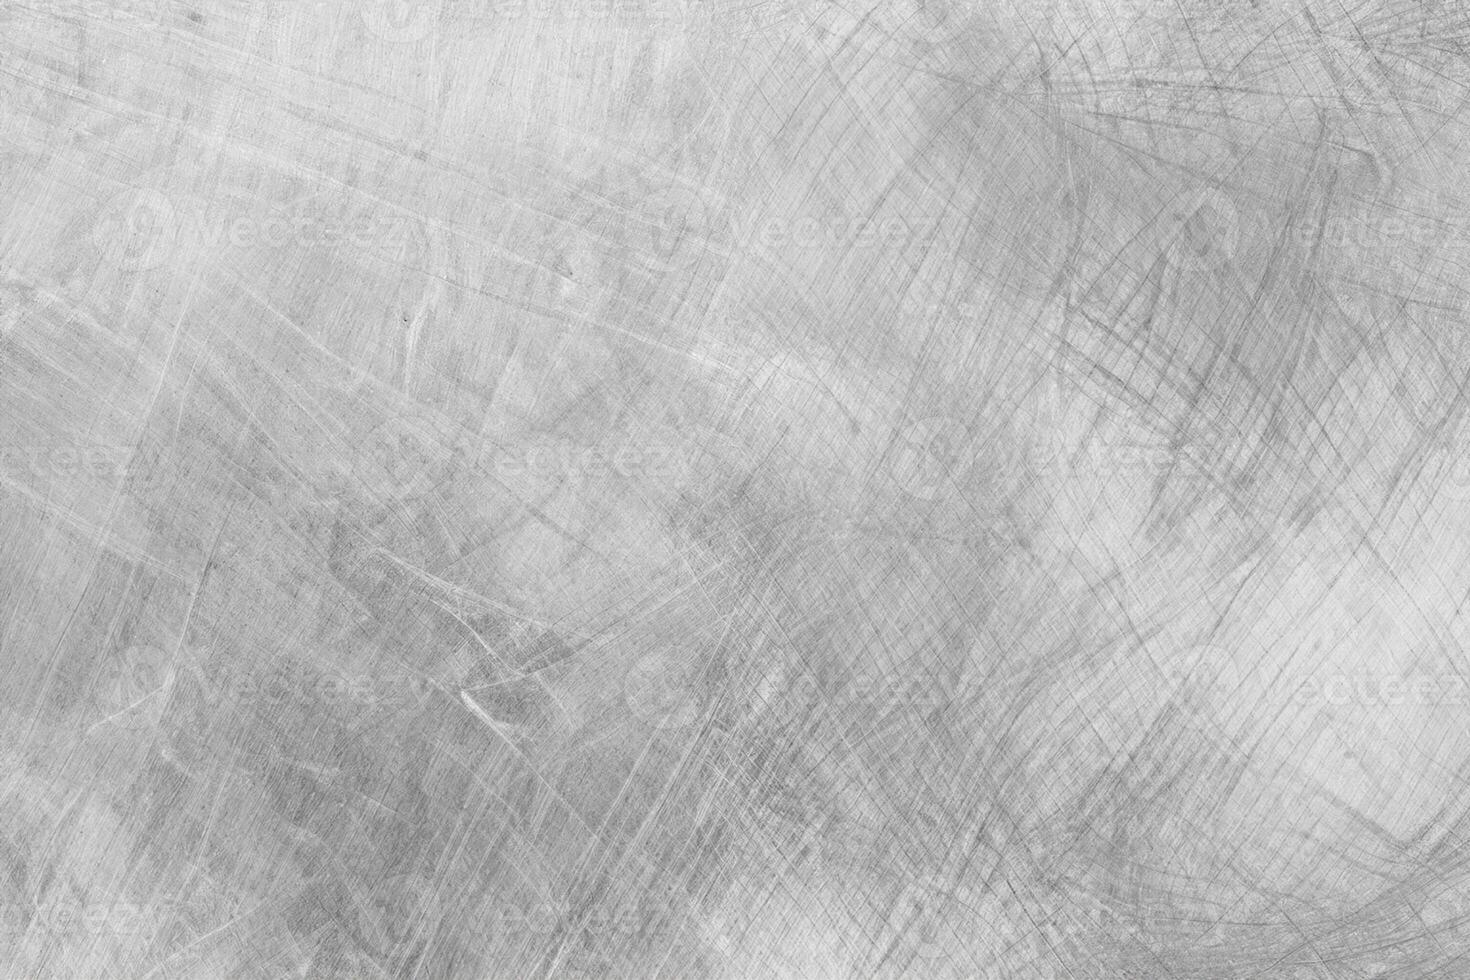 Metal stainless texture background photo